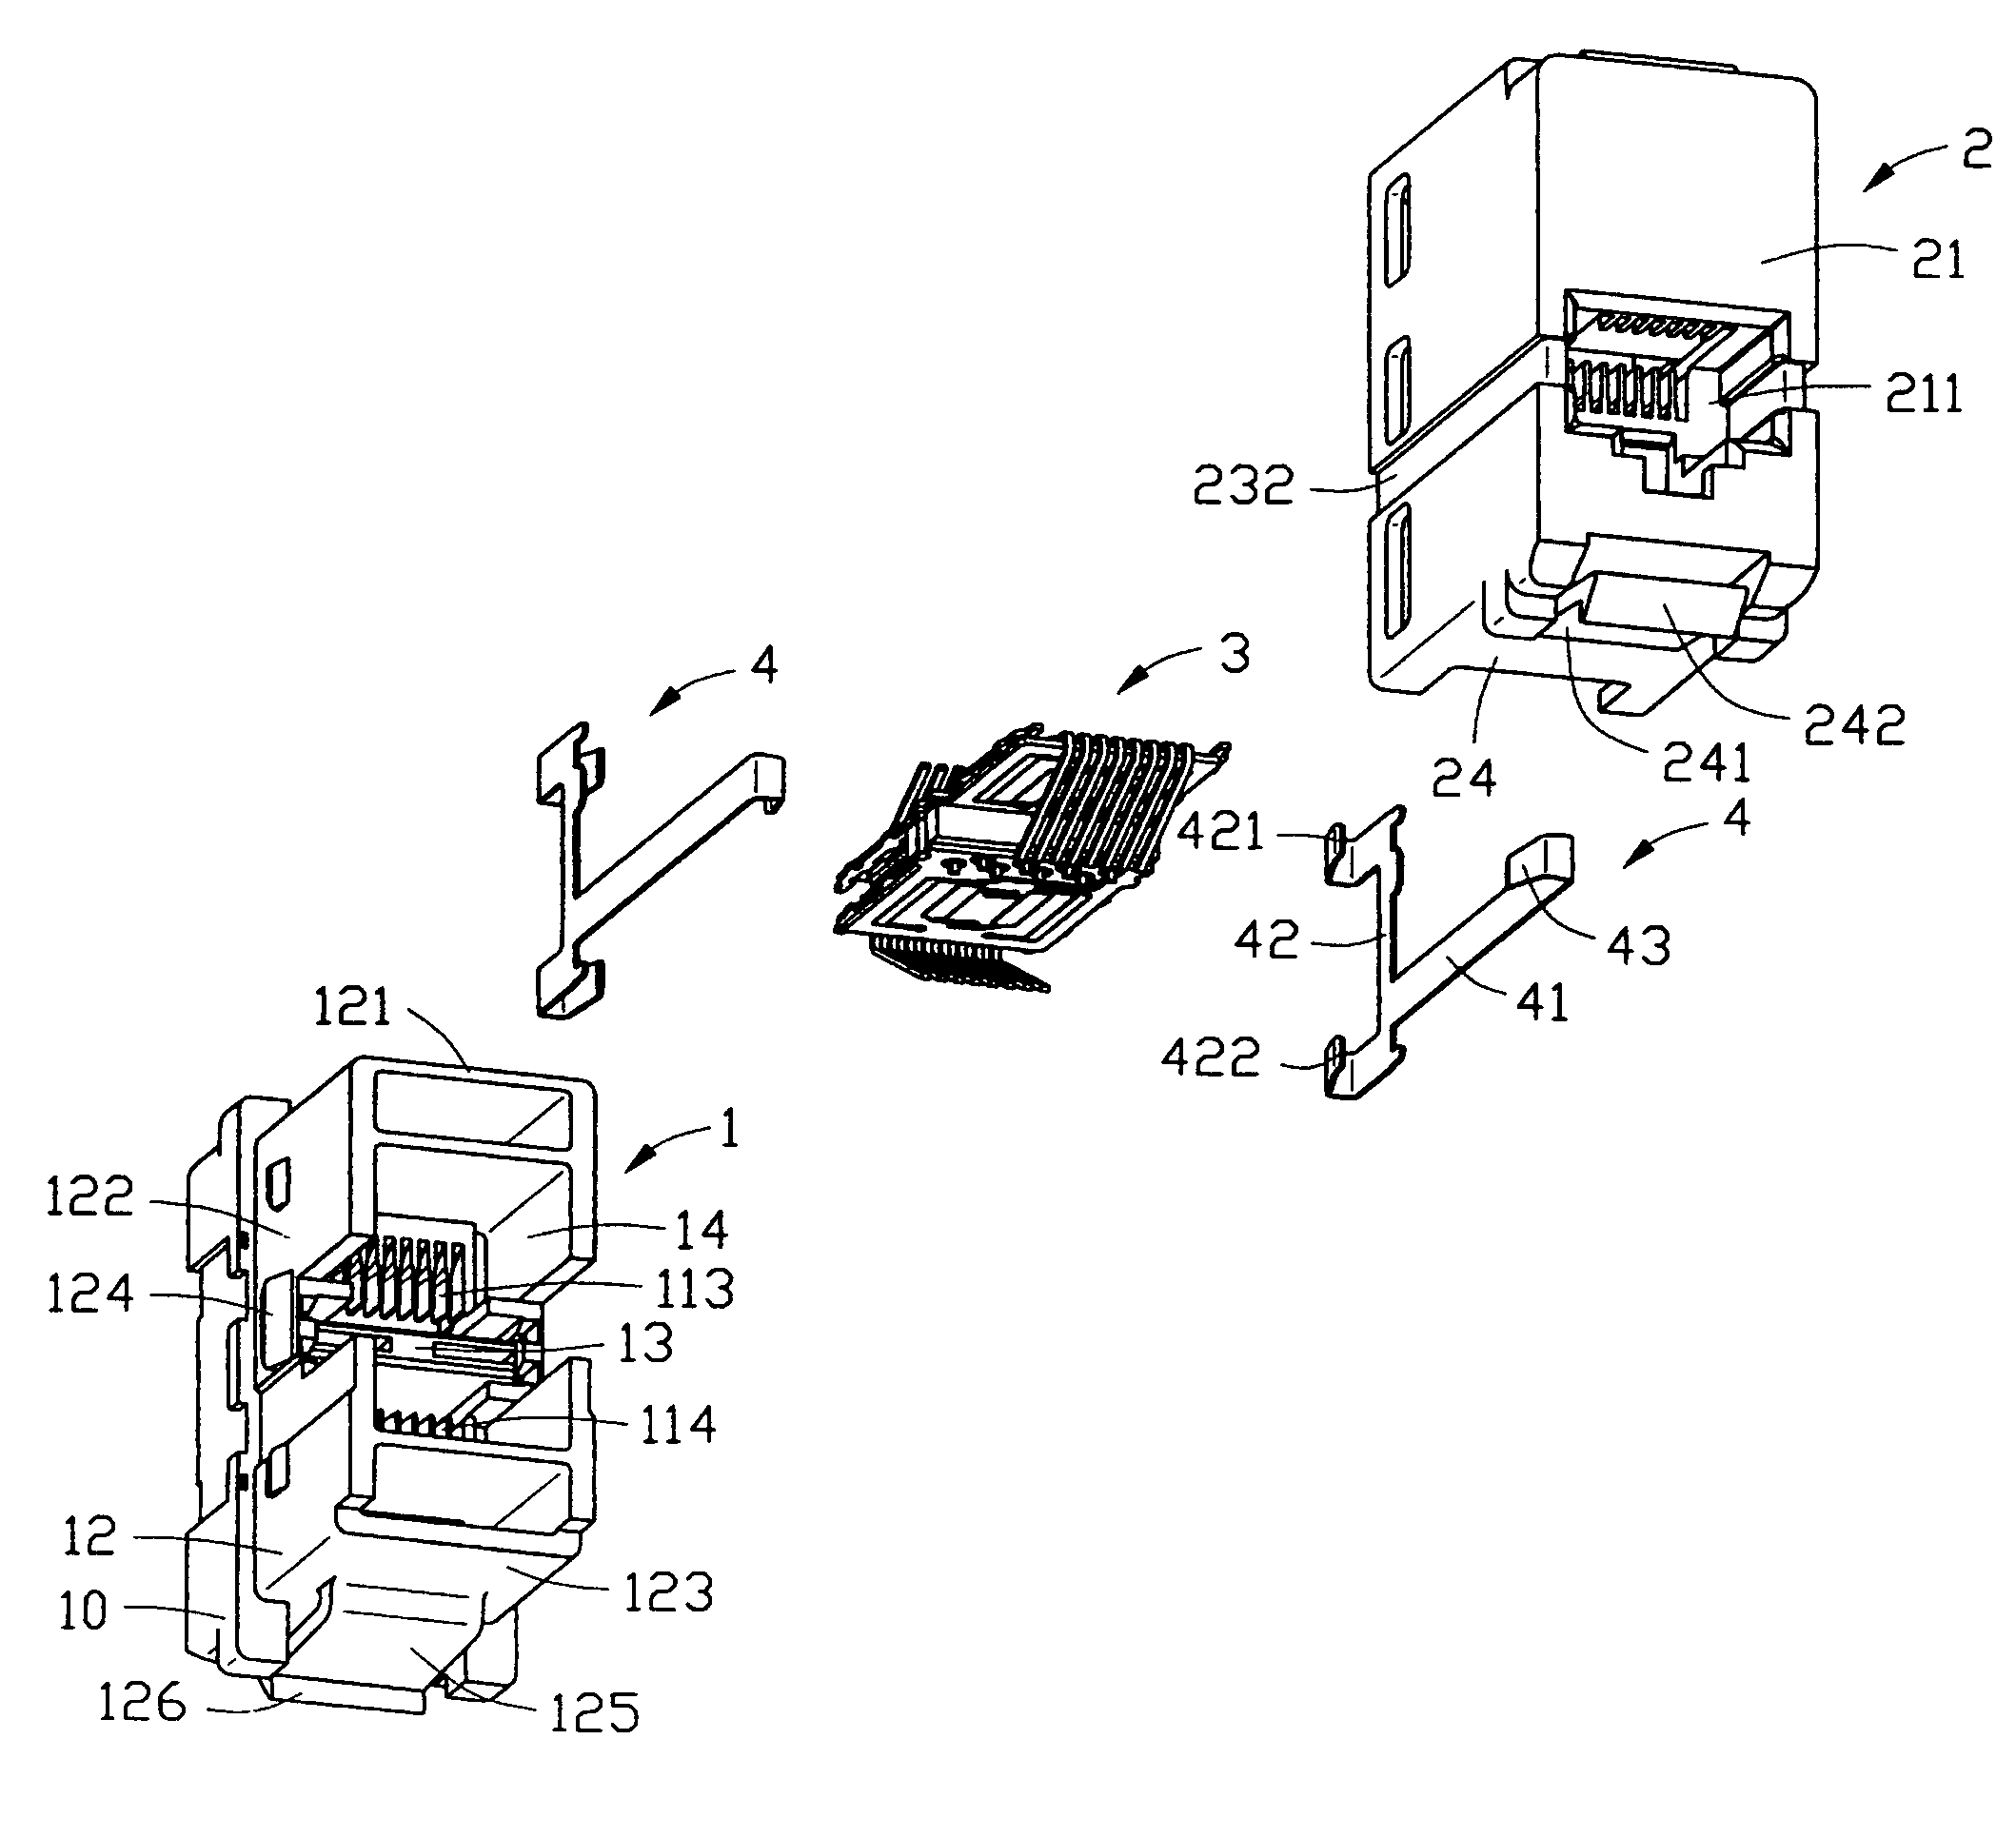 Electrical adapter assembly